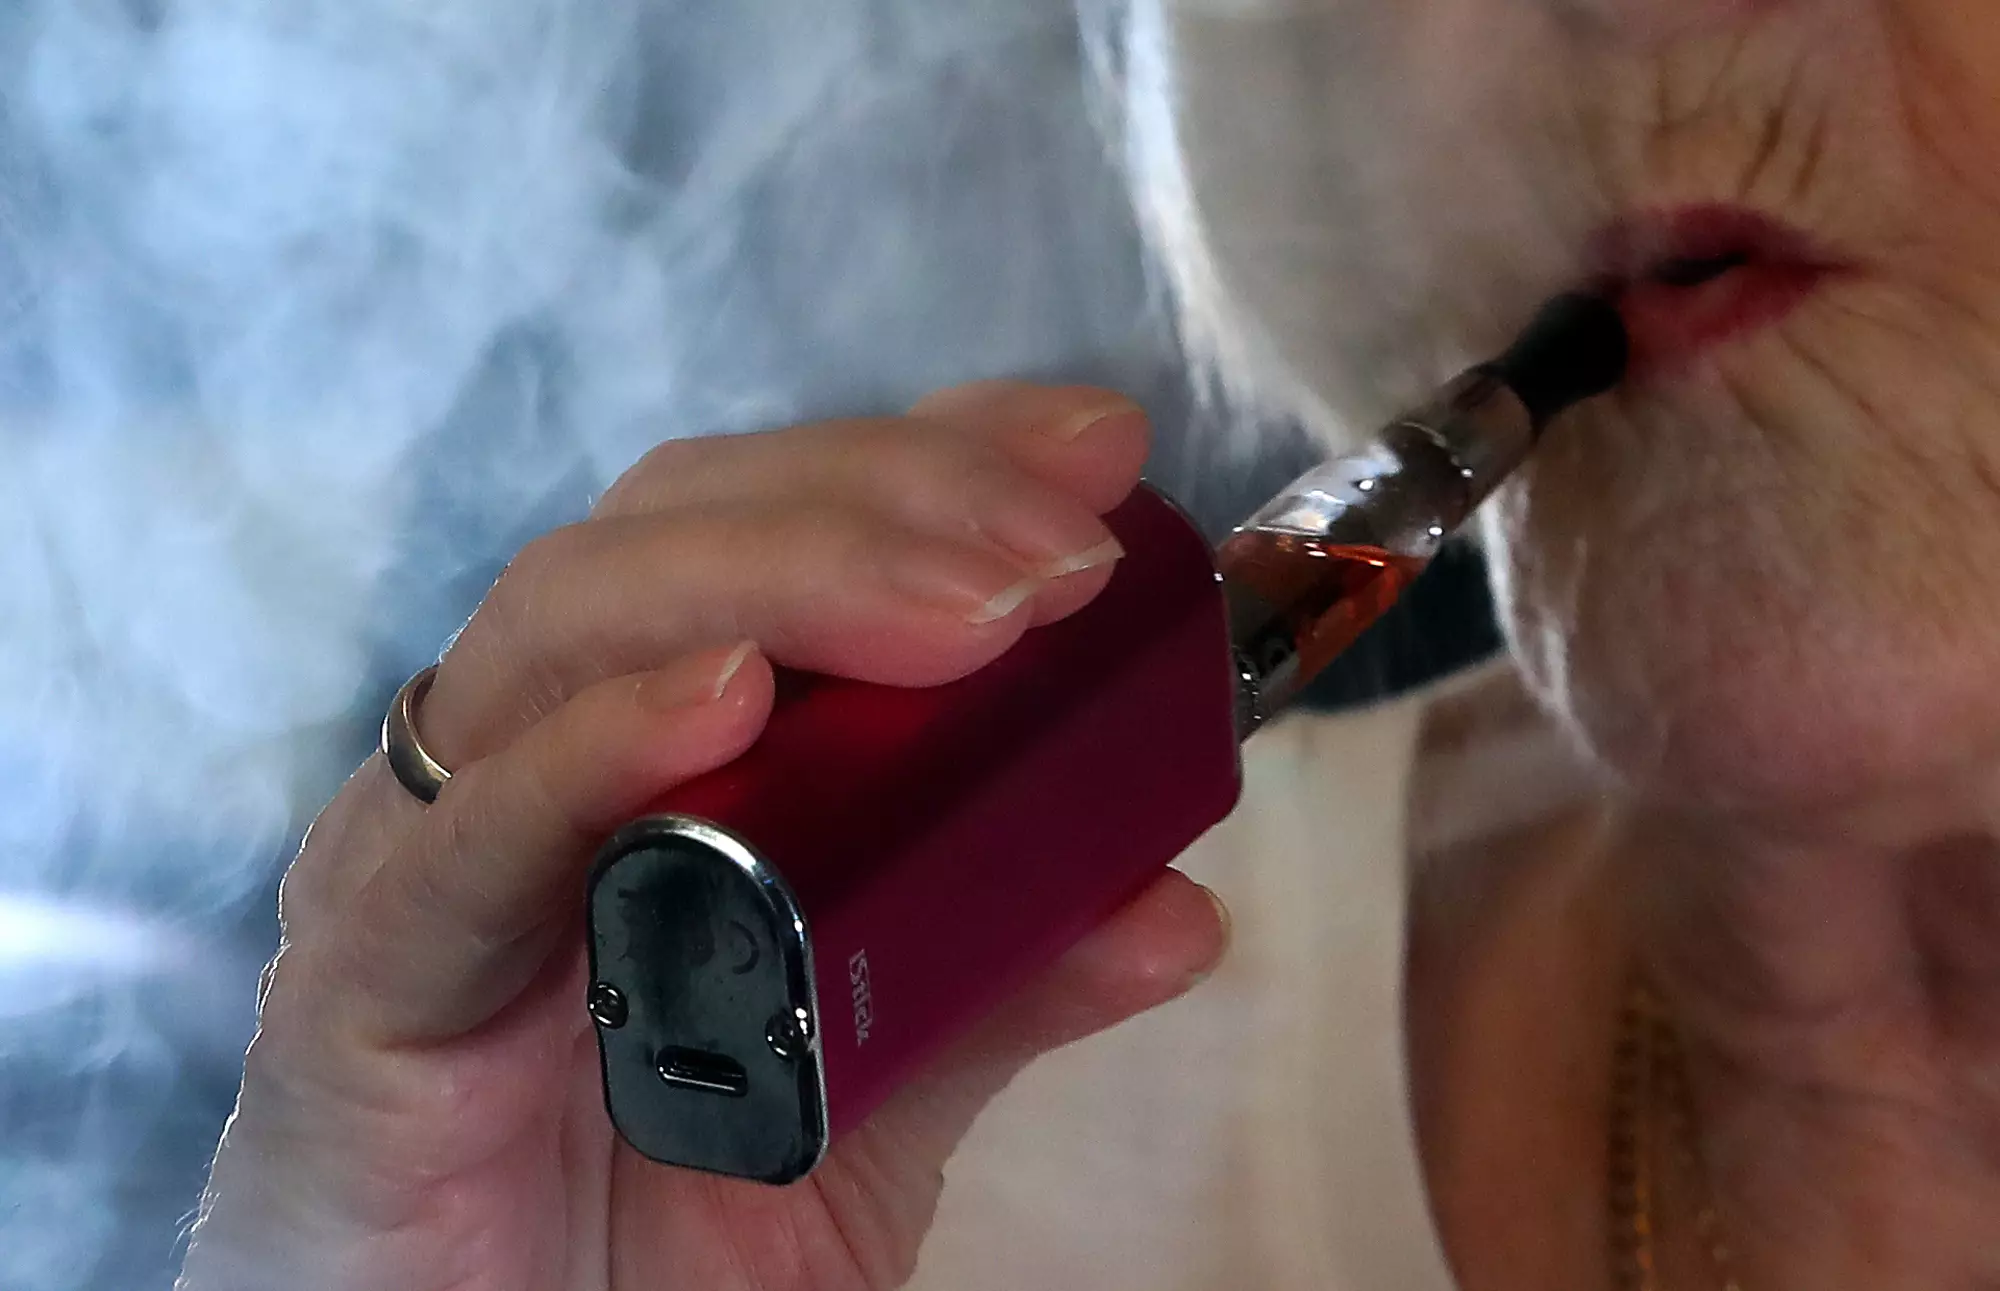 Democratic Governor Gretchen Whitmer said she believes banning flavoured e-cigarettes will stop kids being hooked on nicotine.